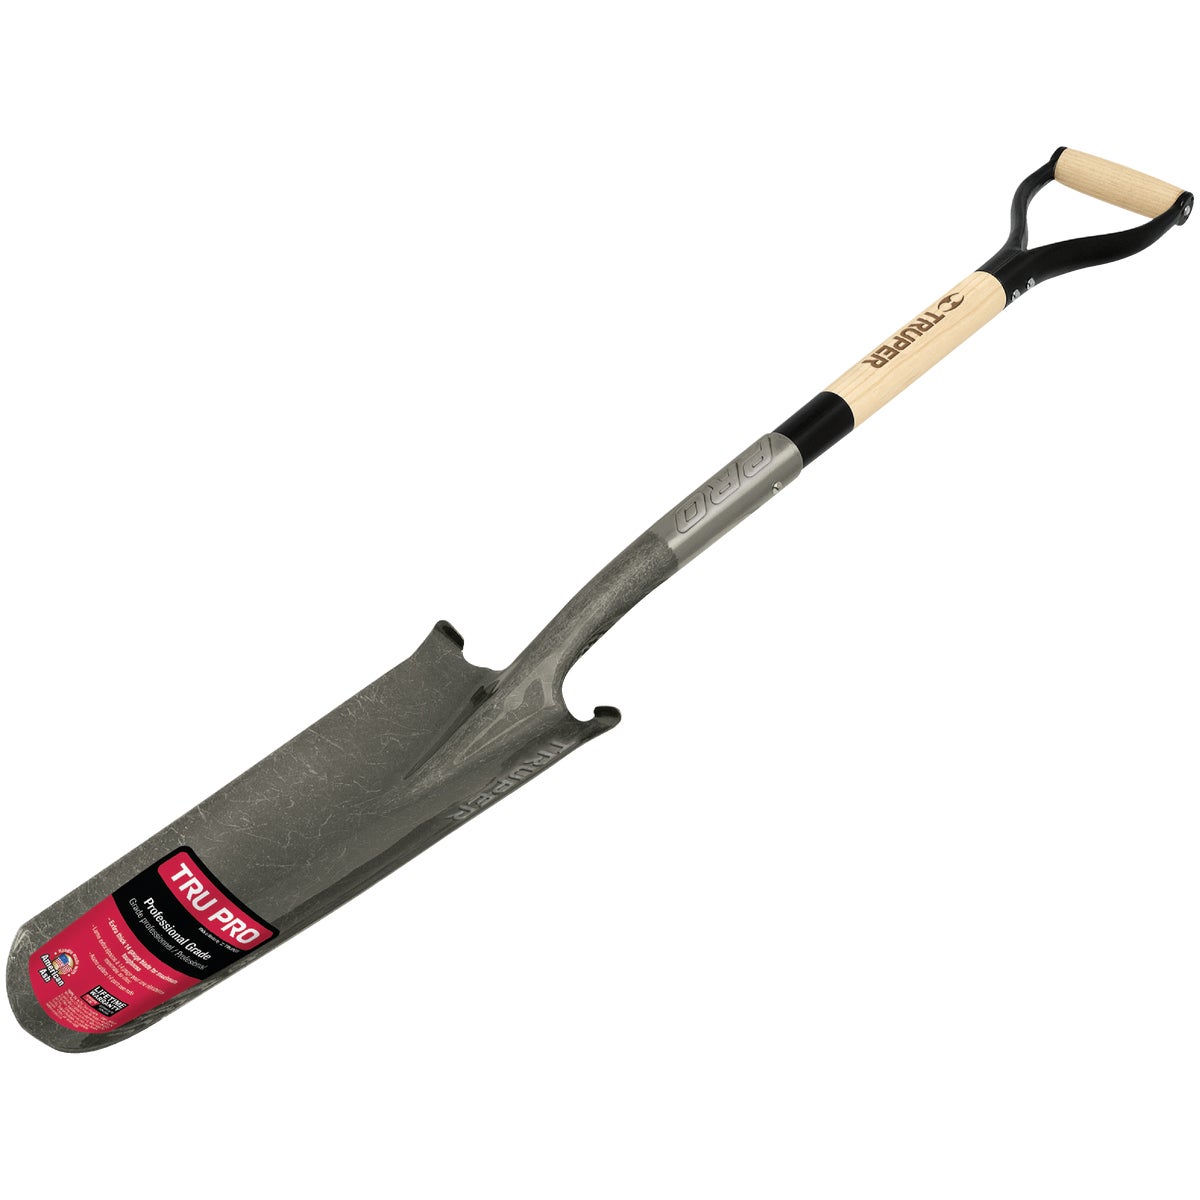 Item 739596, Truper Pro 14-gauge closed back drain spade with extended step and 32 In.